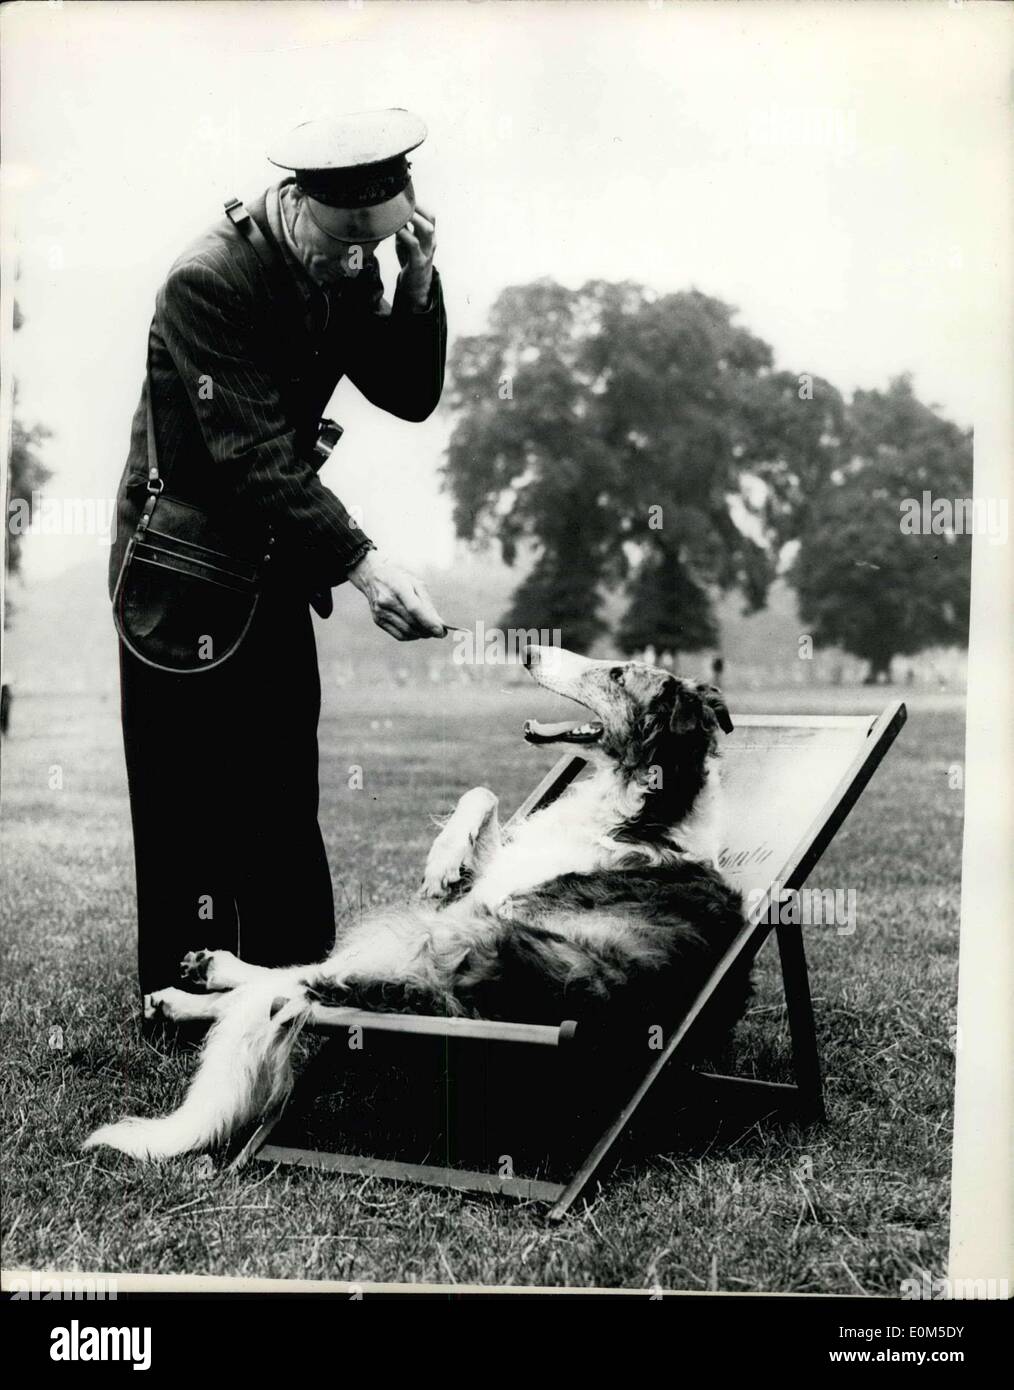 Aug. 11, 1953 - Cool - But Not Collected: Never does a deck-chair look more inviting than on a hot day. But you'll agree with the puzzled ticket collector there isn't a dog's chance of making the borsoi pay. Yet who would have the heart to turn the squatter out? Stock Photo